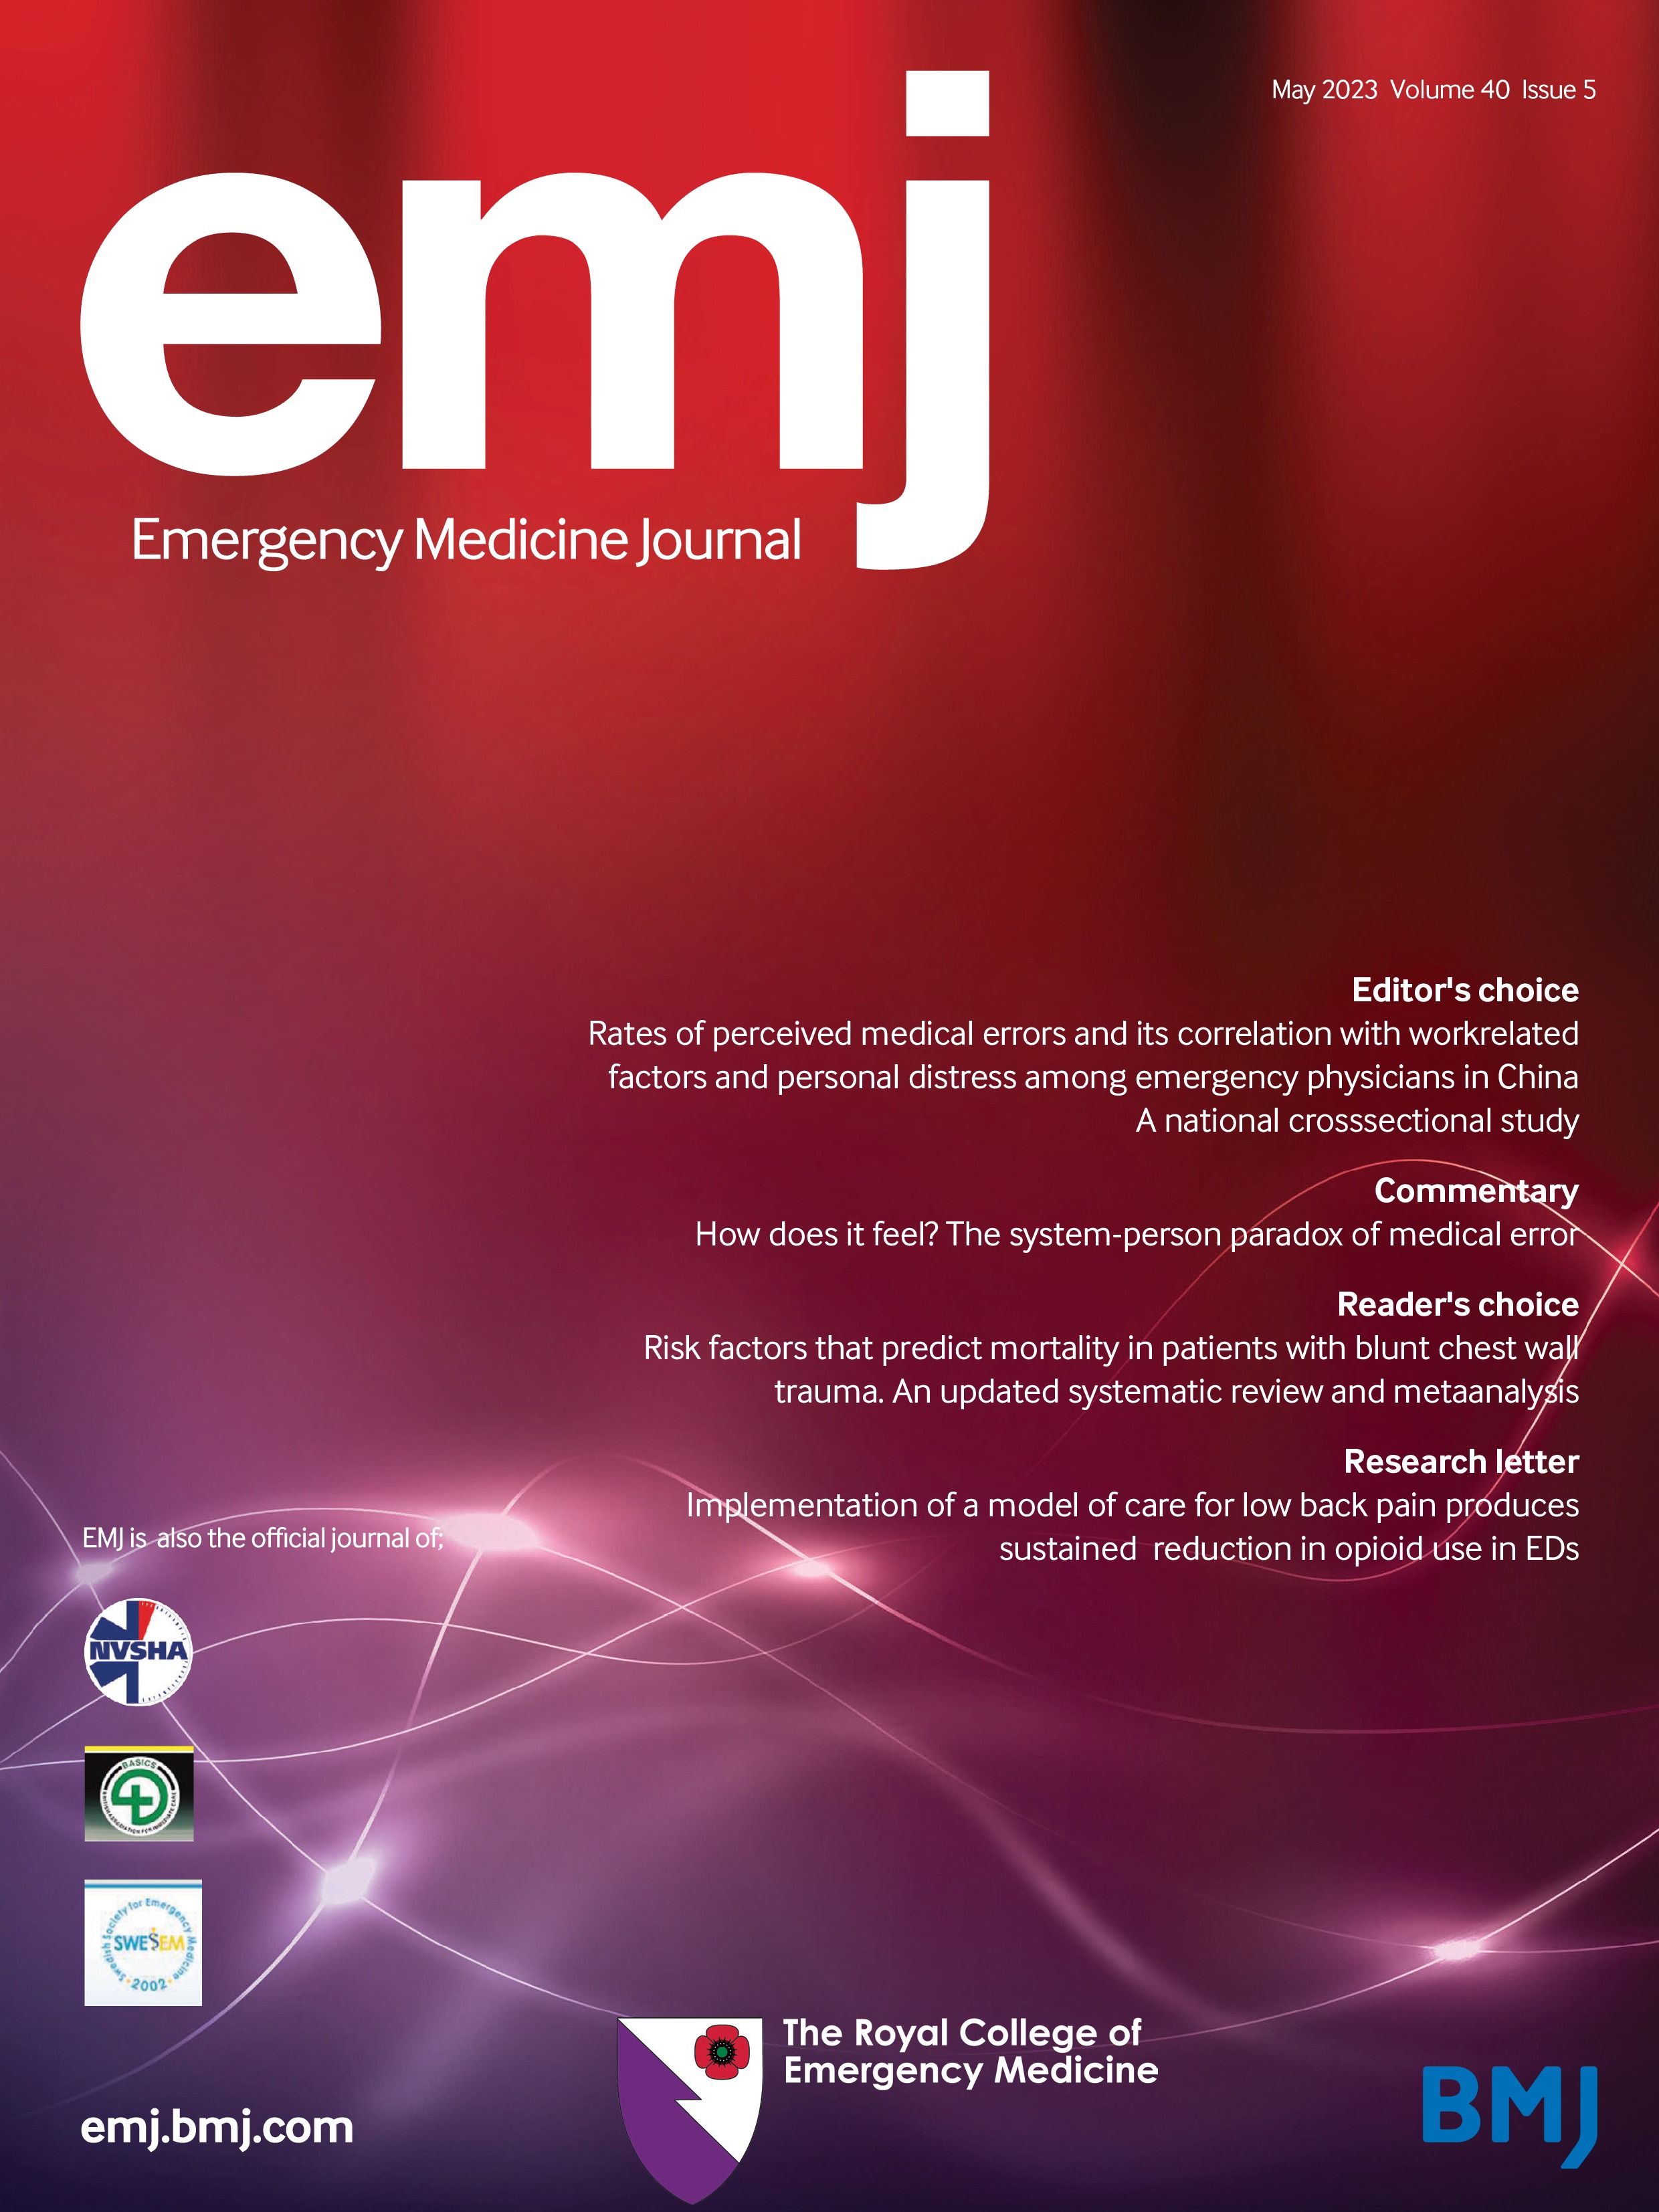 Implementation of a model of care for low back pain produces sustained reduction in opioid use in emergency departments